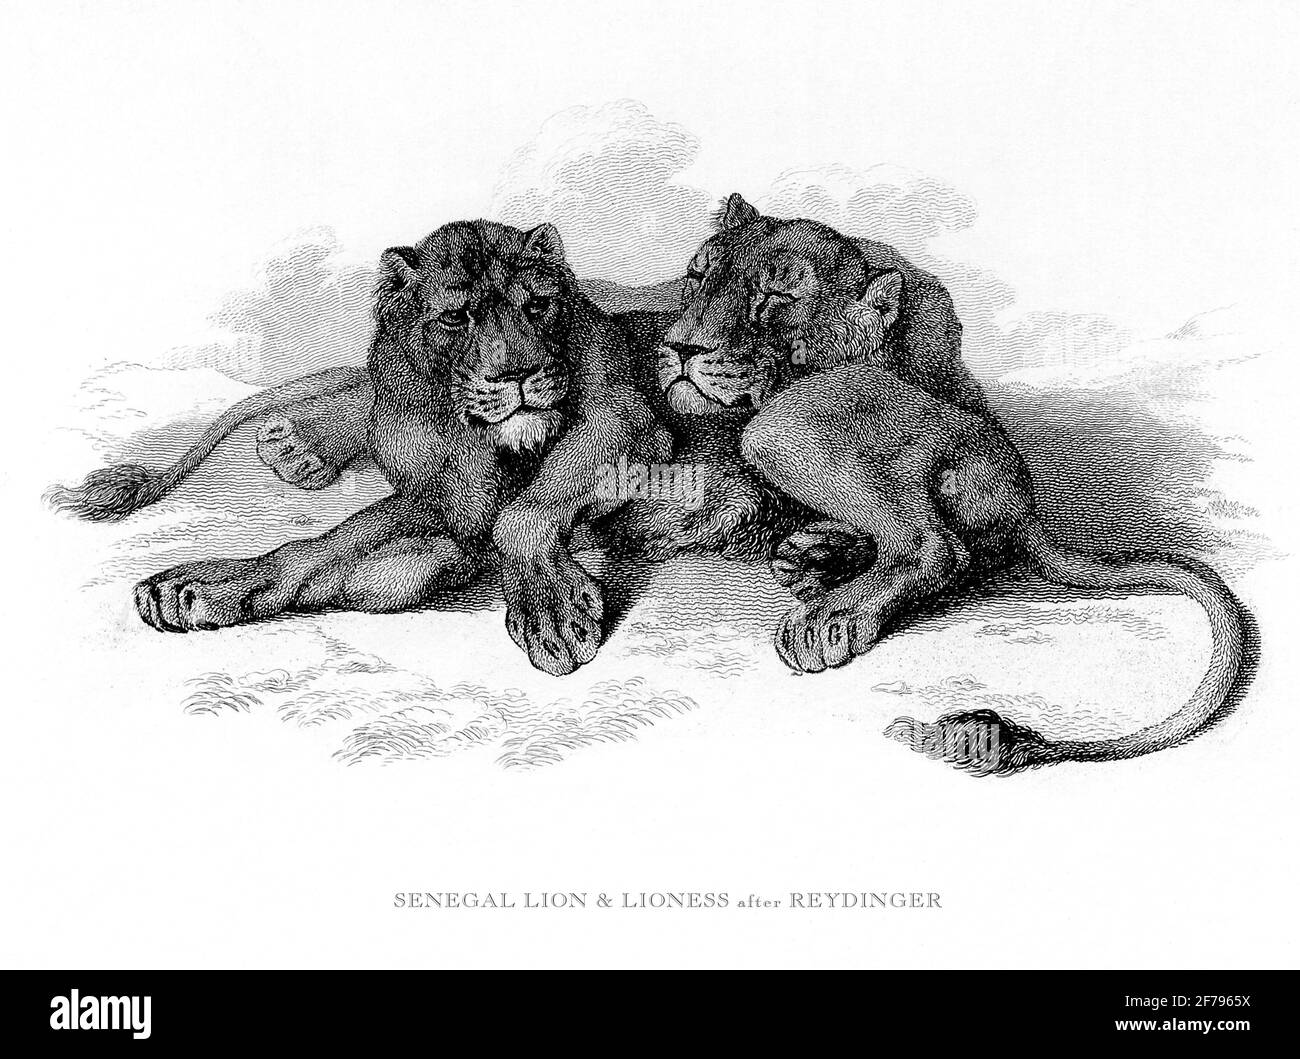 Senegal lion and lioness Engraved Illustration Stock Photo